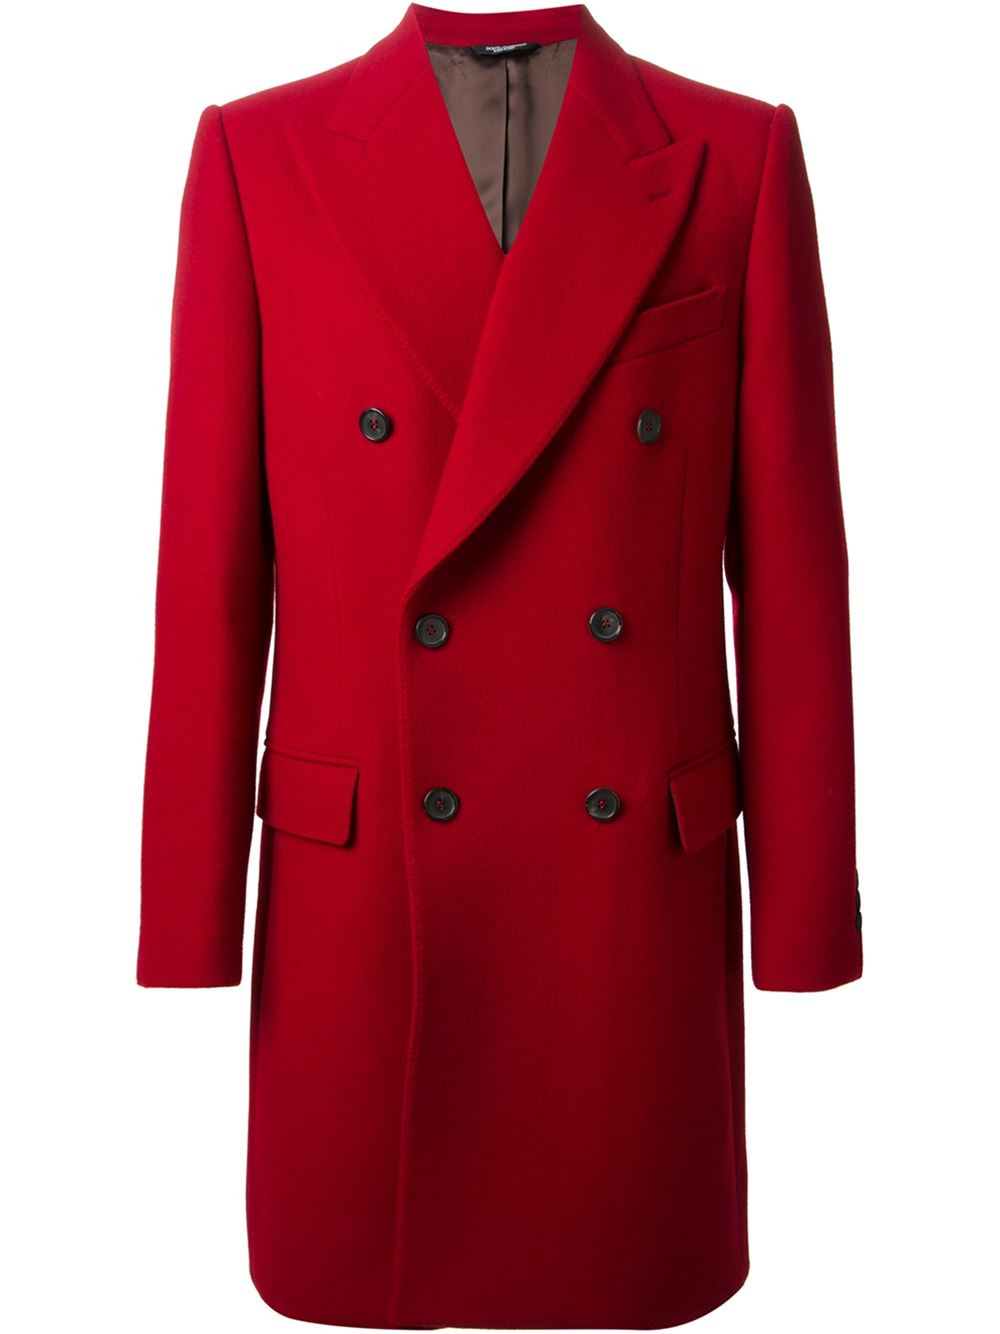 Dolce & Gabbana Double Breasted Coat in Red for Men - Lyst